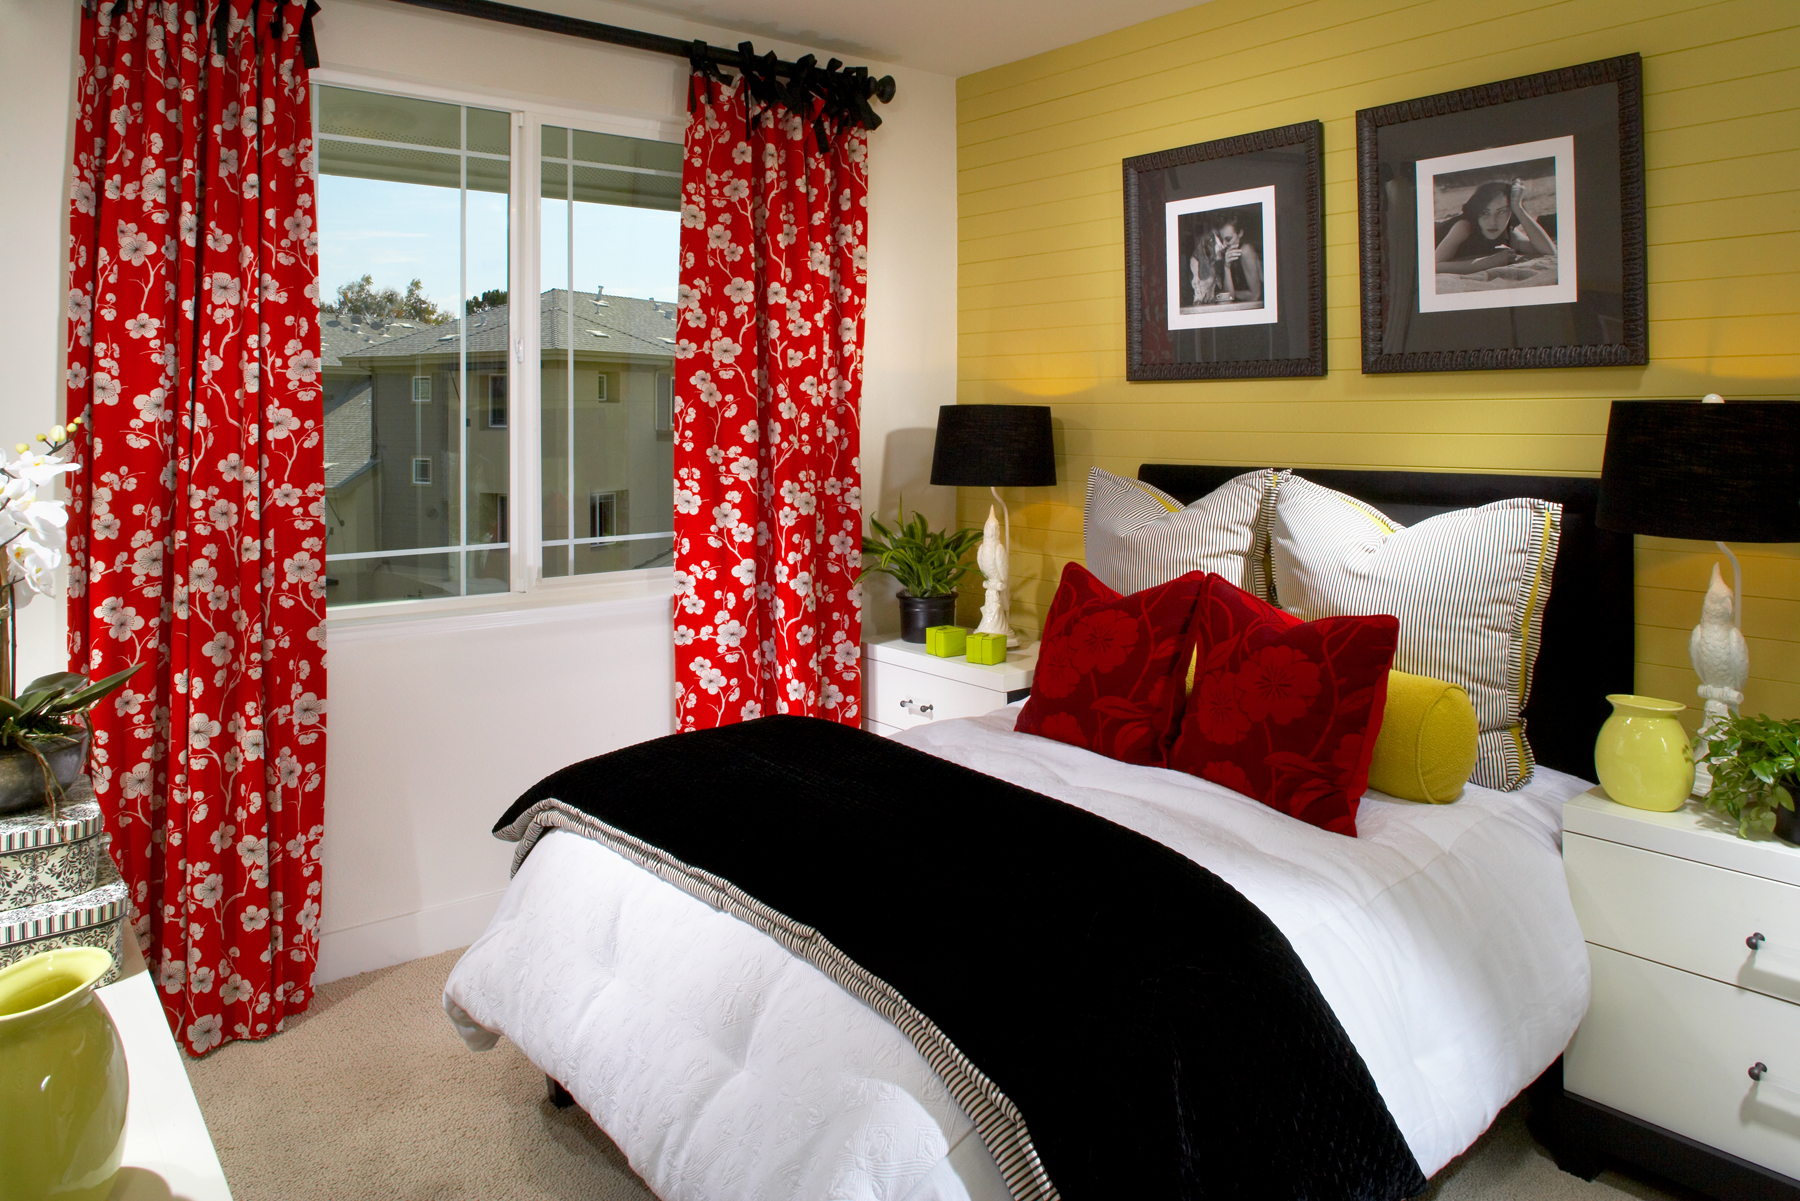 100 Red Bedroom Decorating Ideas Cars Bedroom Decorating